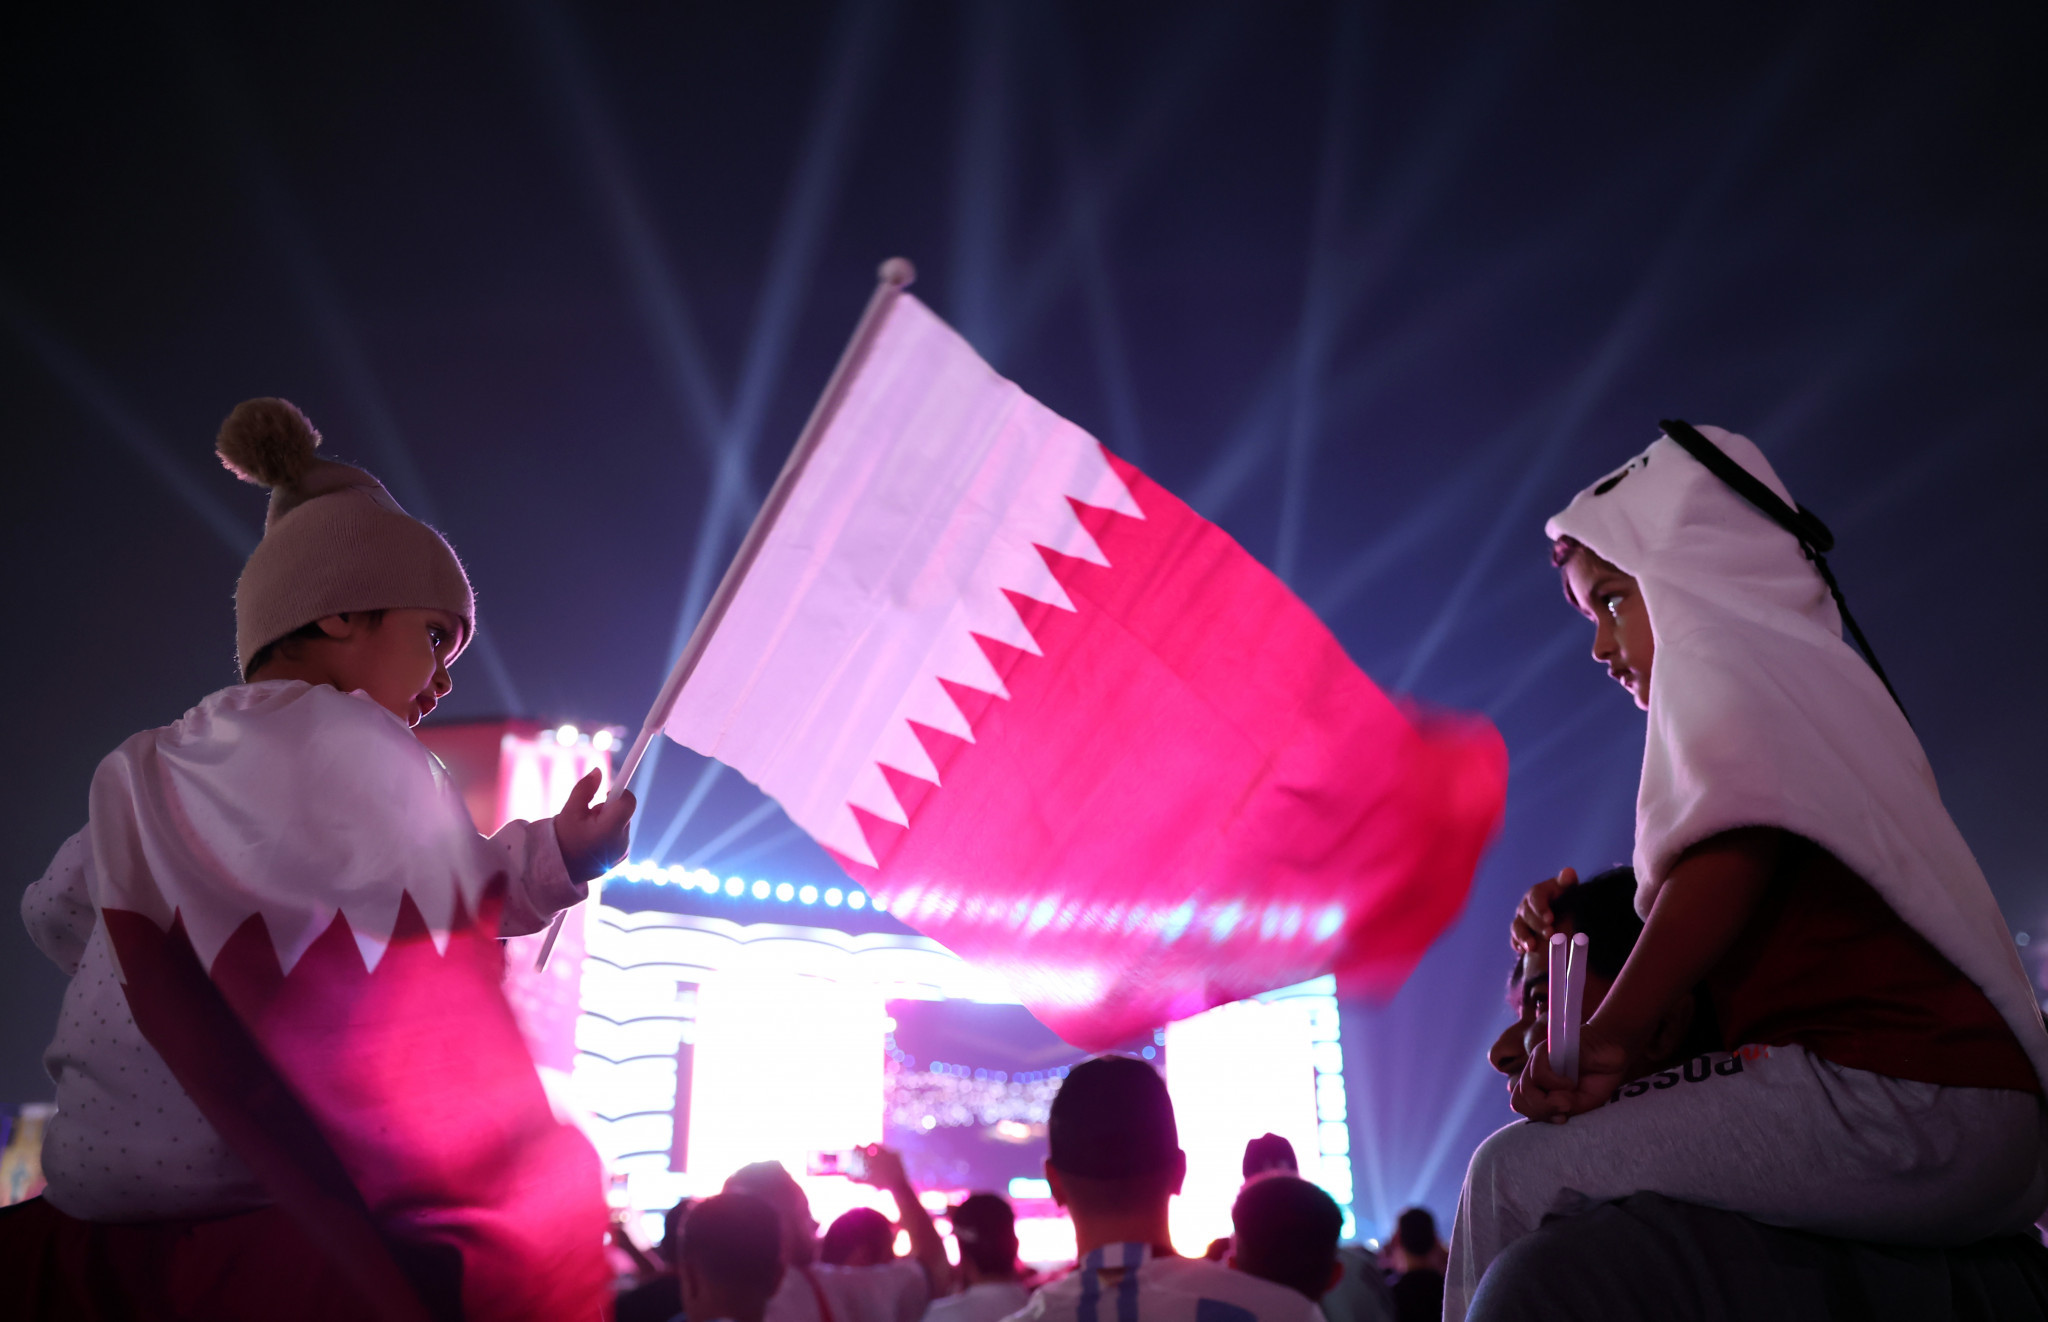 Qatar's treatment of migrant workers has dominated discourse around the FIFA World Cup ©Getty Images 